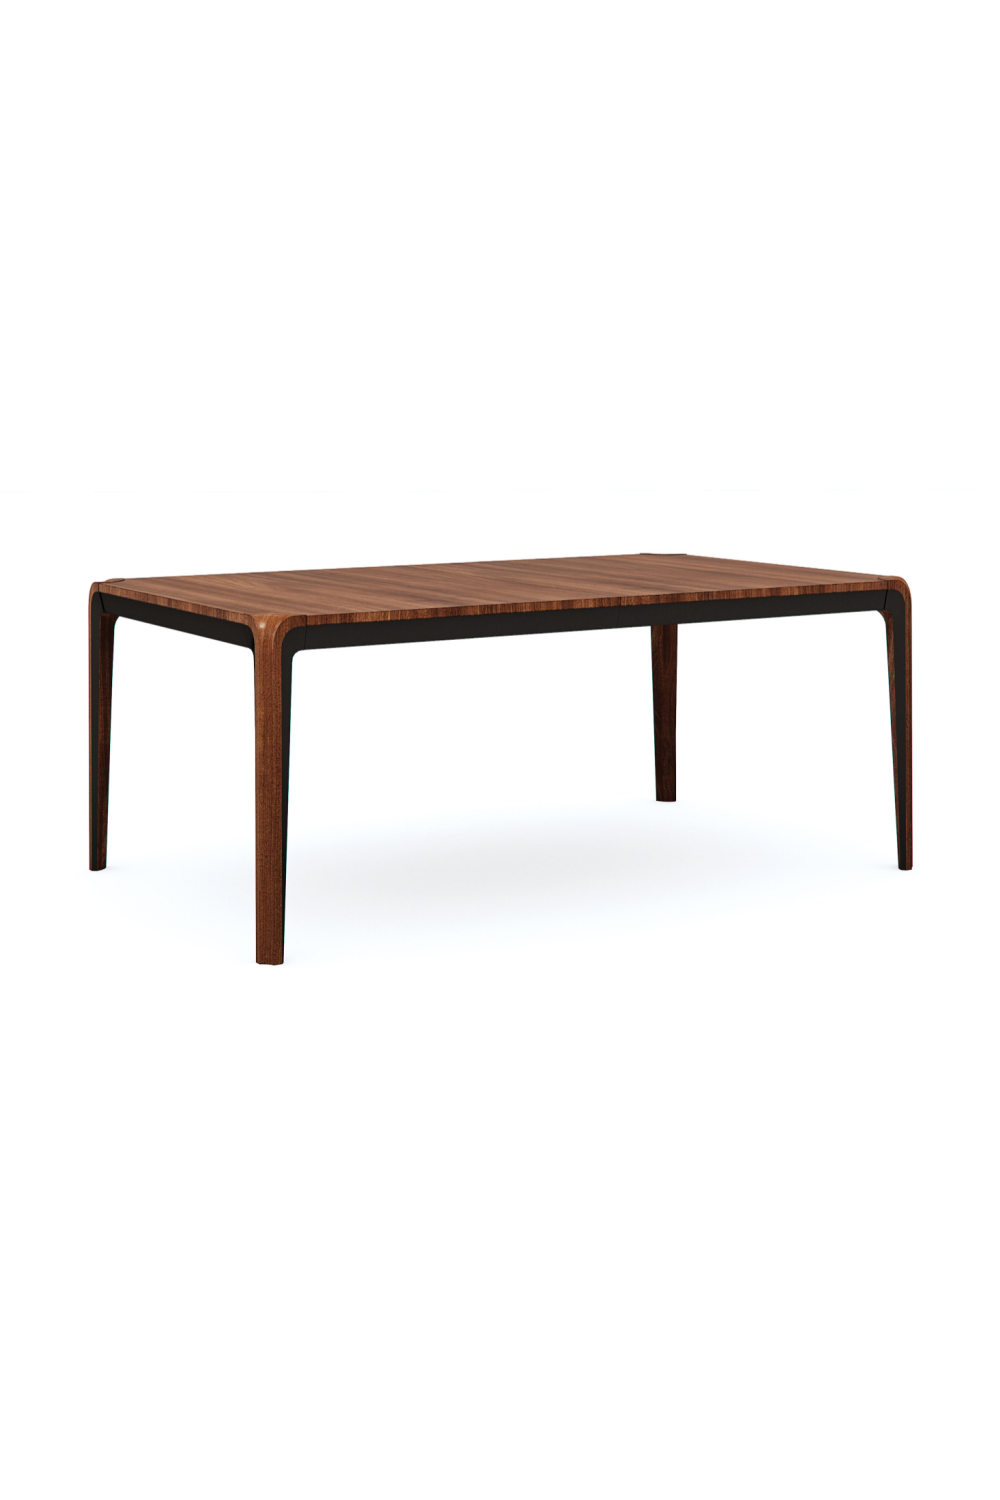 Dark Brown Walnut Dining Table | Caracole Room For More | Oroa.com